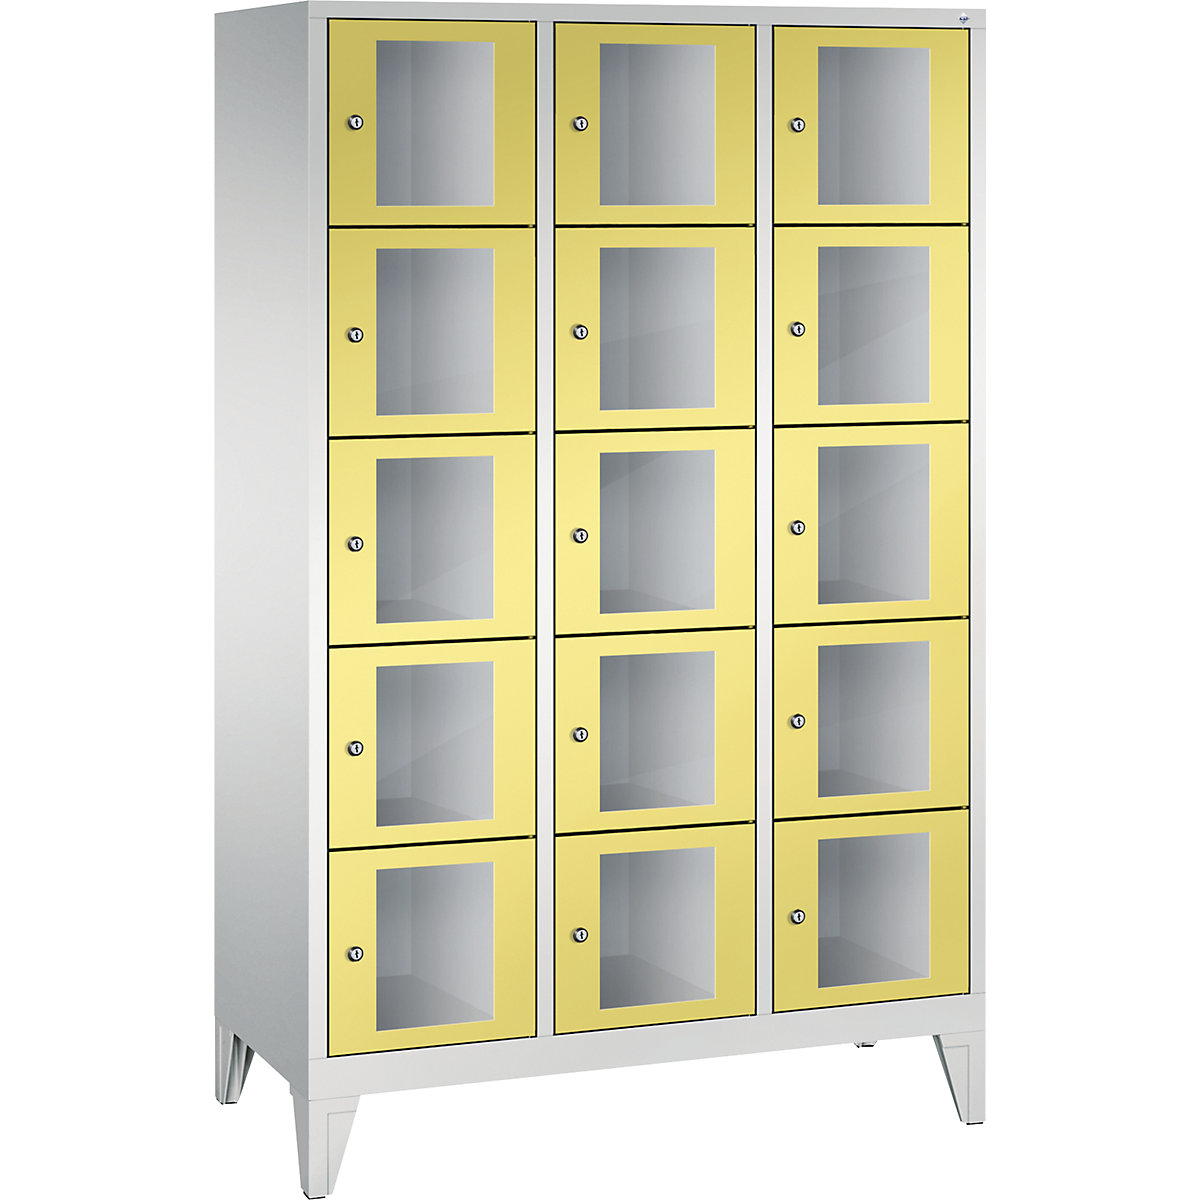 C+P – CLASSIC locker unit, compartment height 295 mm, with feet, 15 compartments, width 1200 mm, sulphur yellow door